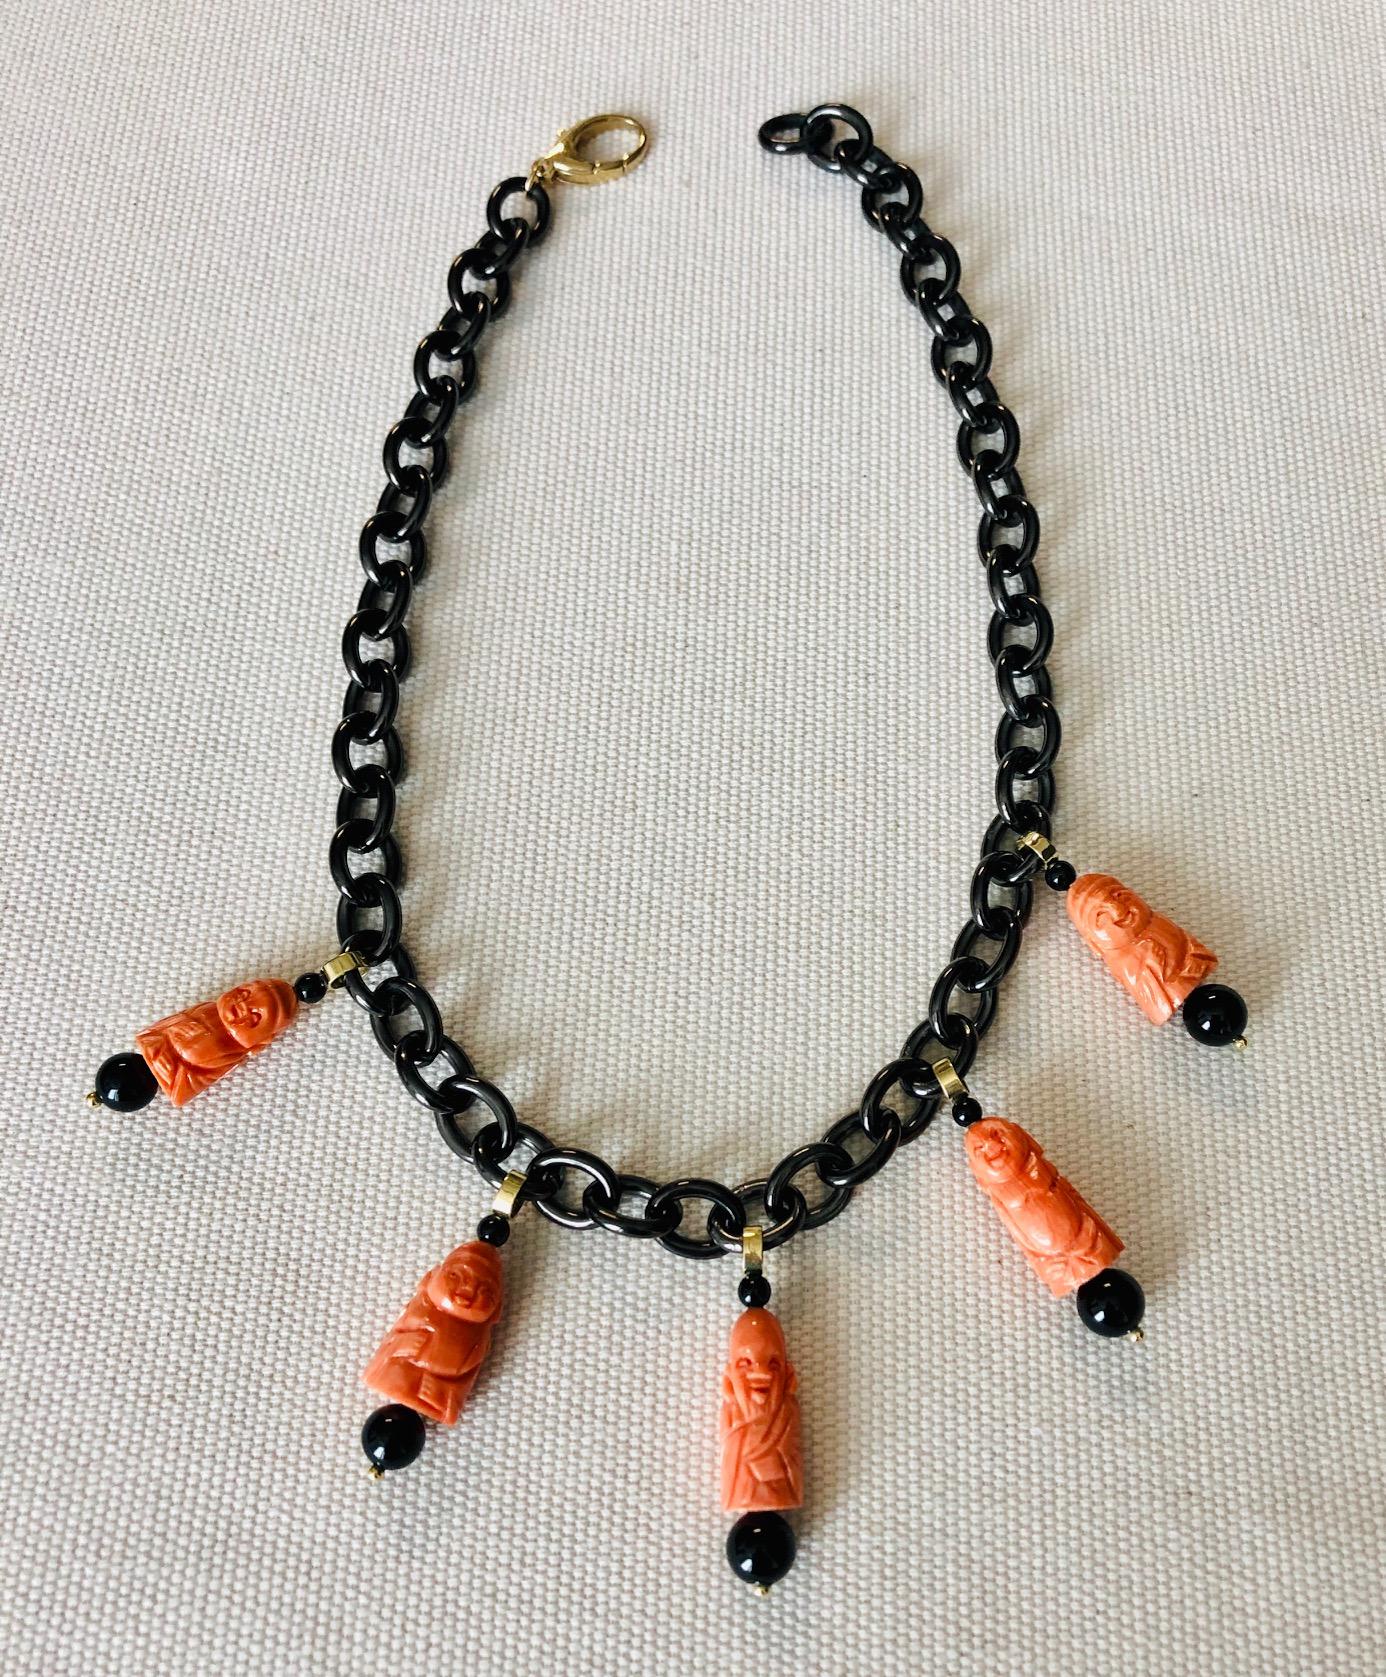 Bead Hand Carved Italian Coral, Onyx, Yellow Gold Charm Necklace with Blackened Steel